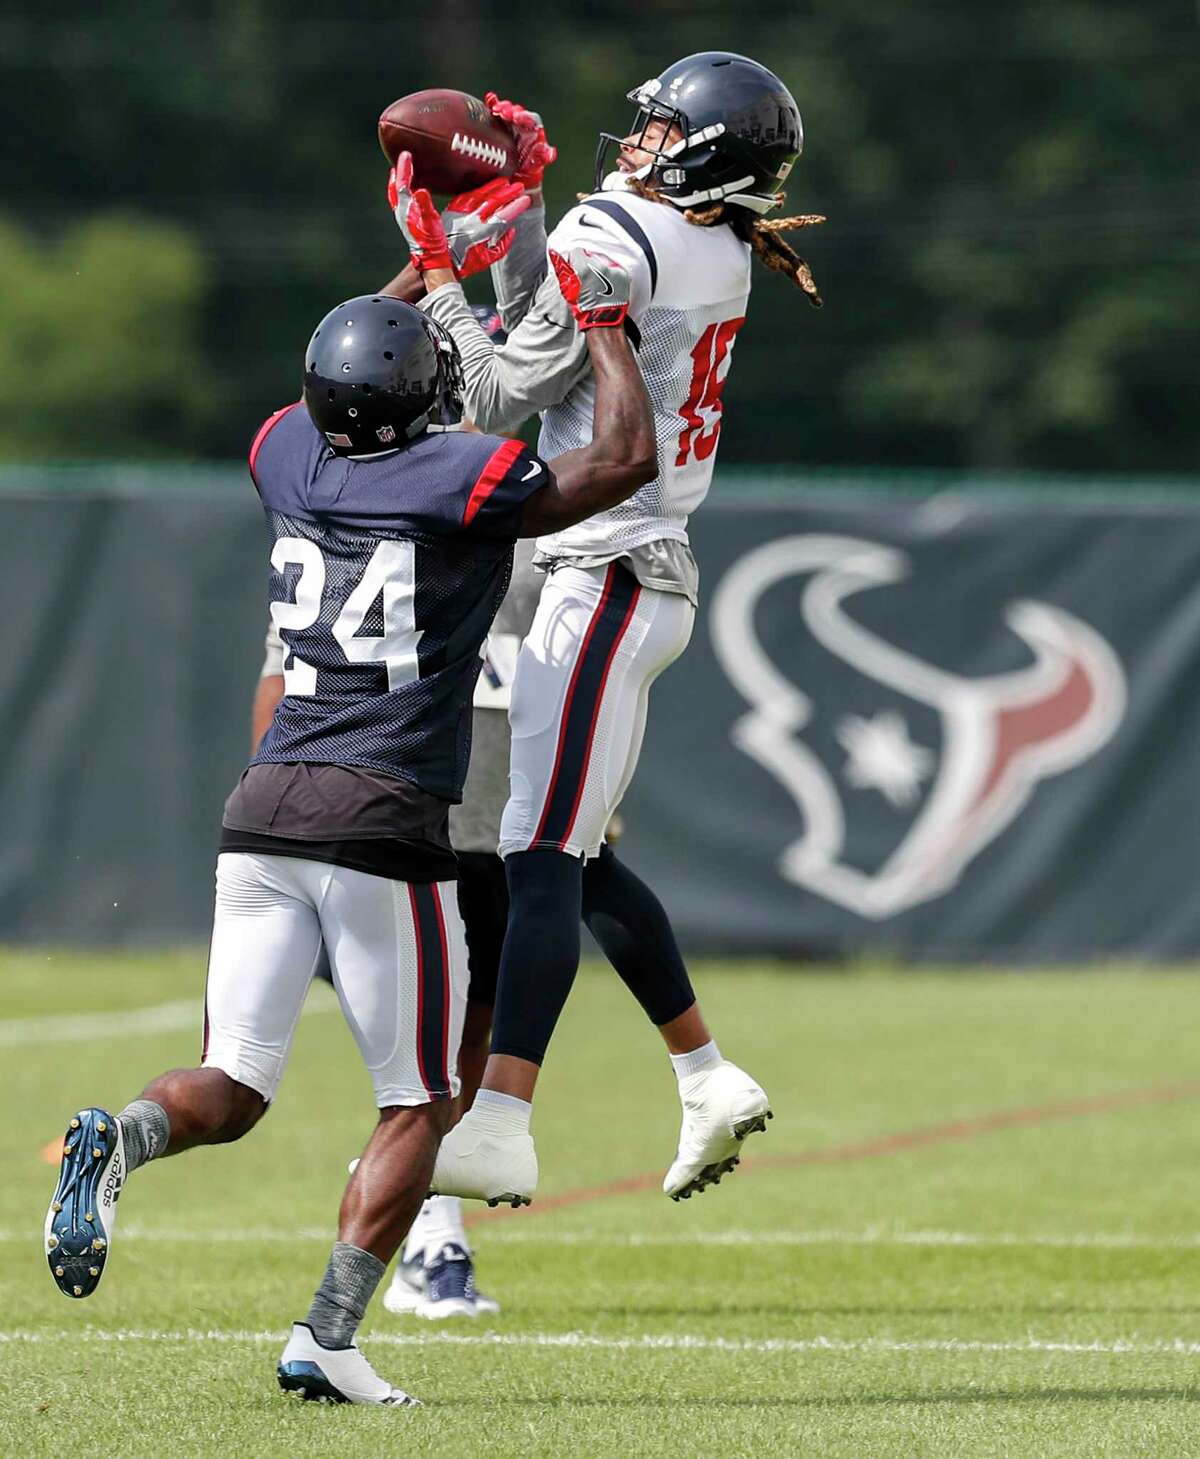 Houston Texans cornerback Johnathan Joseph (24) defends a pass to wide receiver Will Fuller (15) during training camp at the Greenbrier on Tuesday, Aug. 1, 2017, in White Sulphur Springs, W.Va.